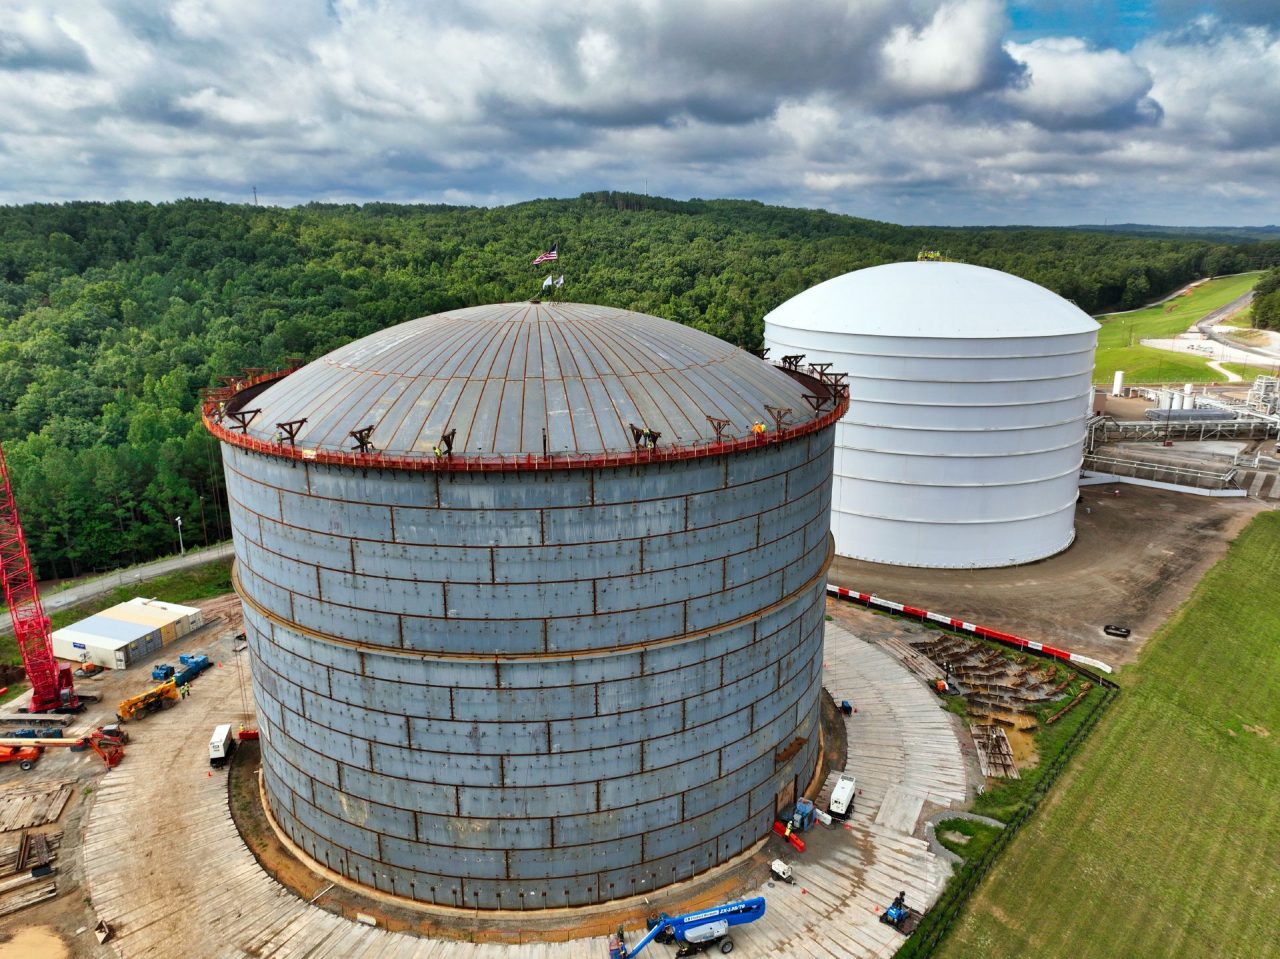 Atlanta Gas Light raised the roof on our new tank at our Cherokee LNG facility! This project will double our capacity at this facility and will help us stay ahead of projected natural gas demands in this fast-growing region.